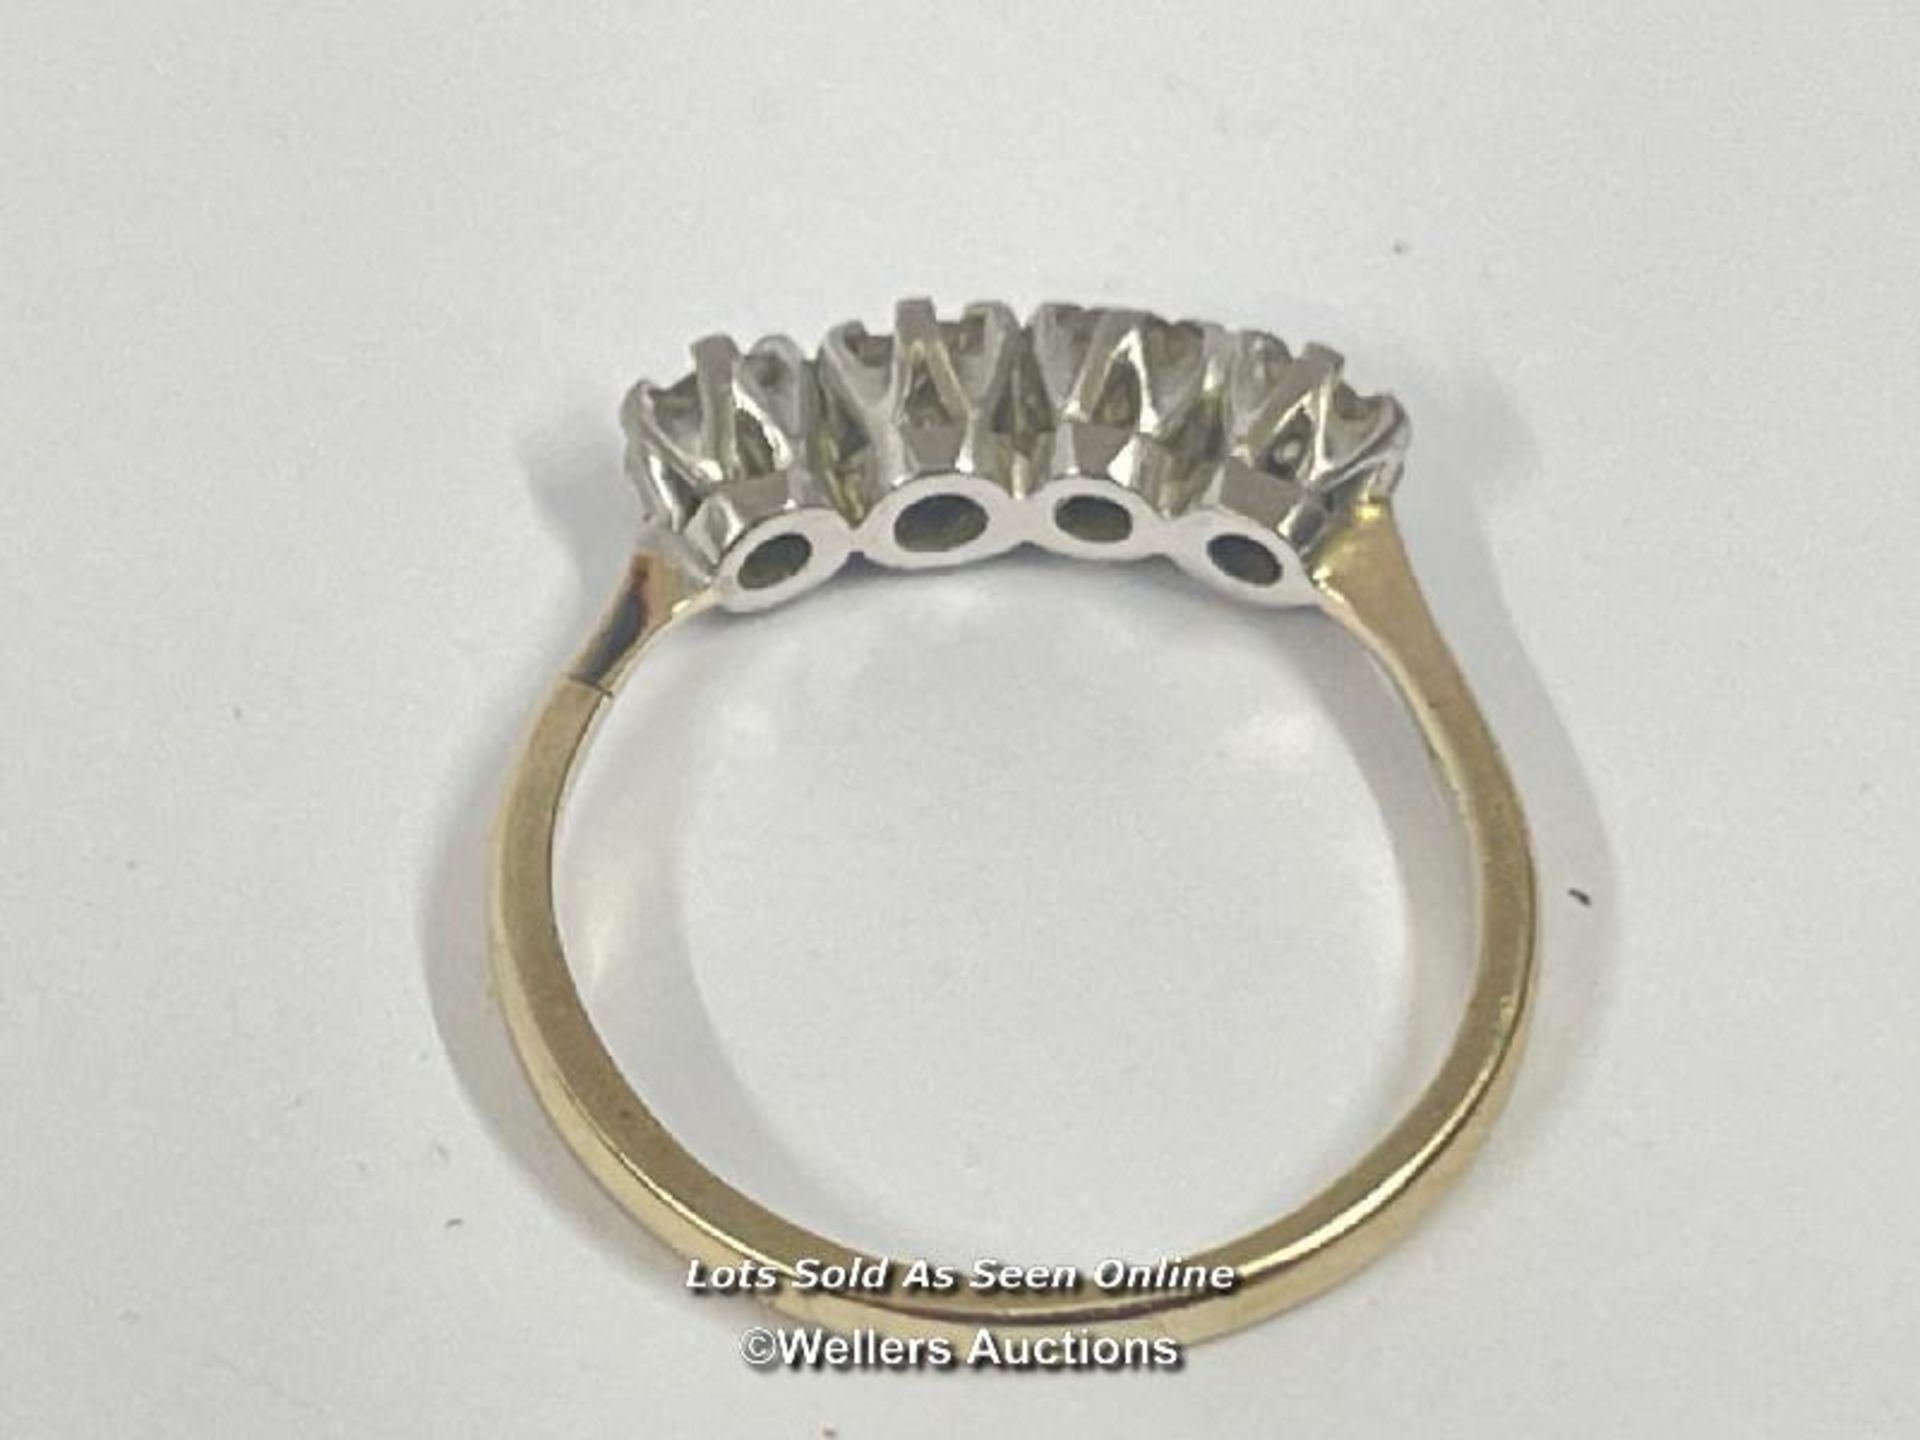 FOUR STONE DIAMOND RING IN HALLMARKED 9CT GOLD. ESTIMATED DIAMOND WEIGHT 0.45CT, RING SIZE L 1/2, - Image 3 of 4